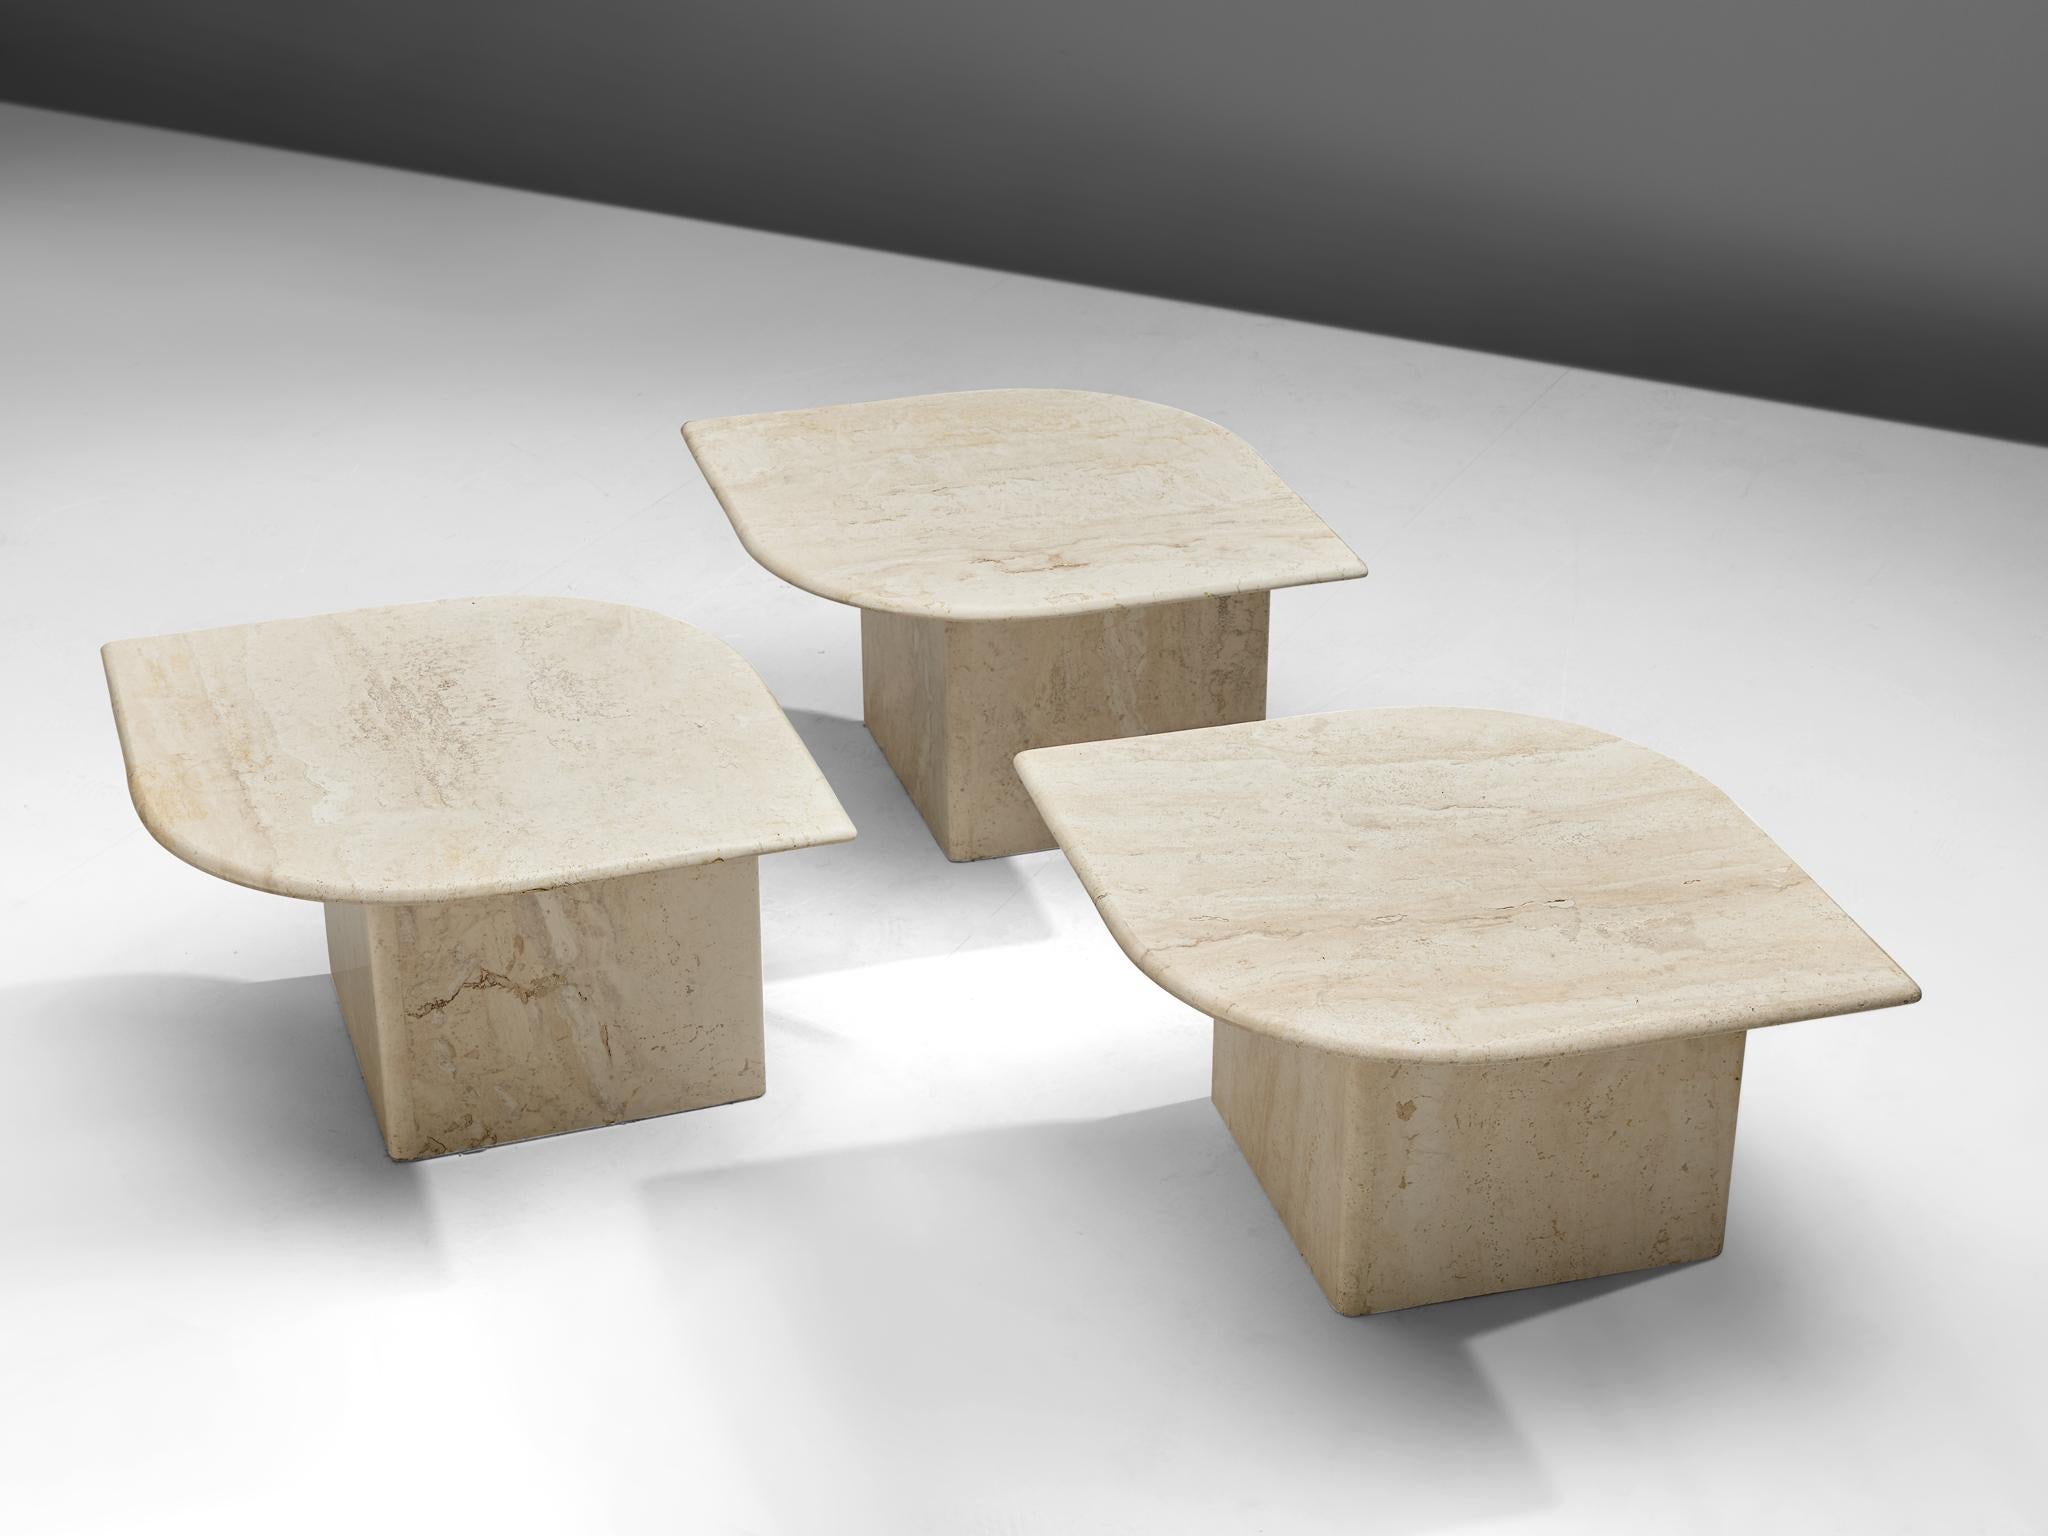 Italian Set of Three Travertine Coffee Tables with Leaf Shaped Tops